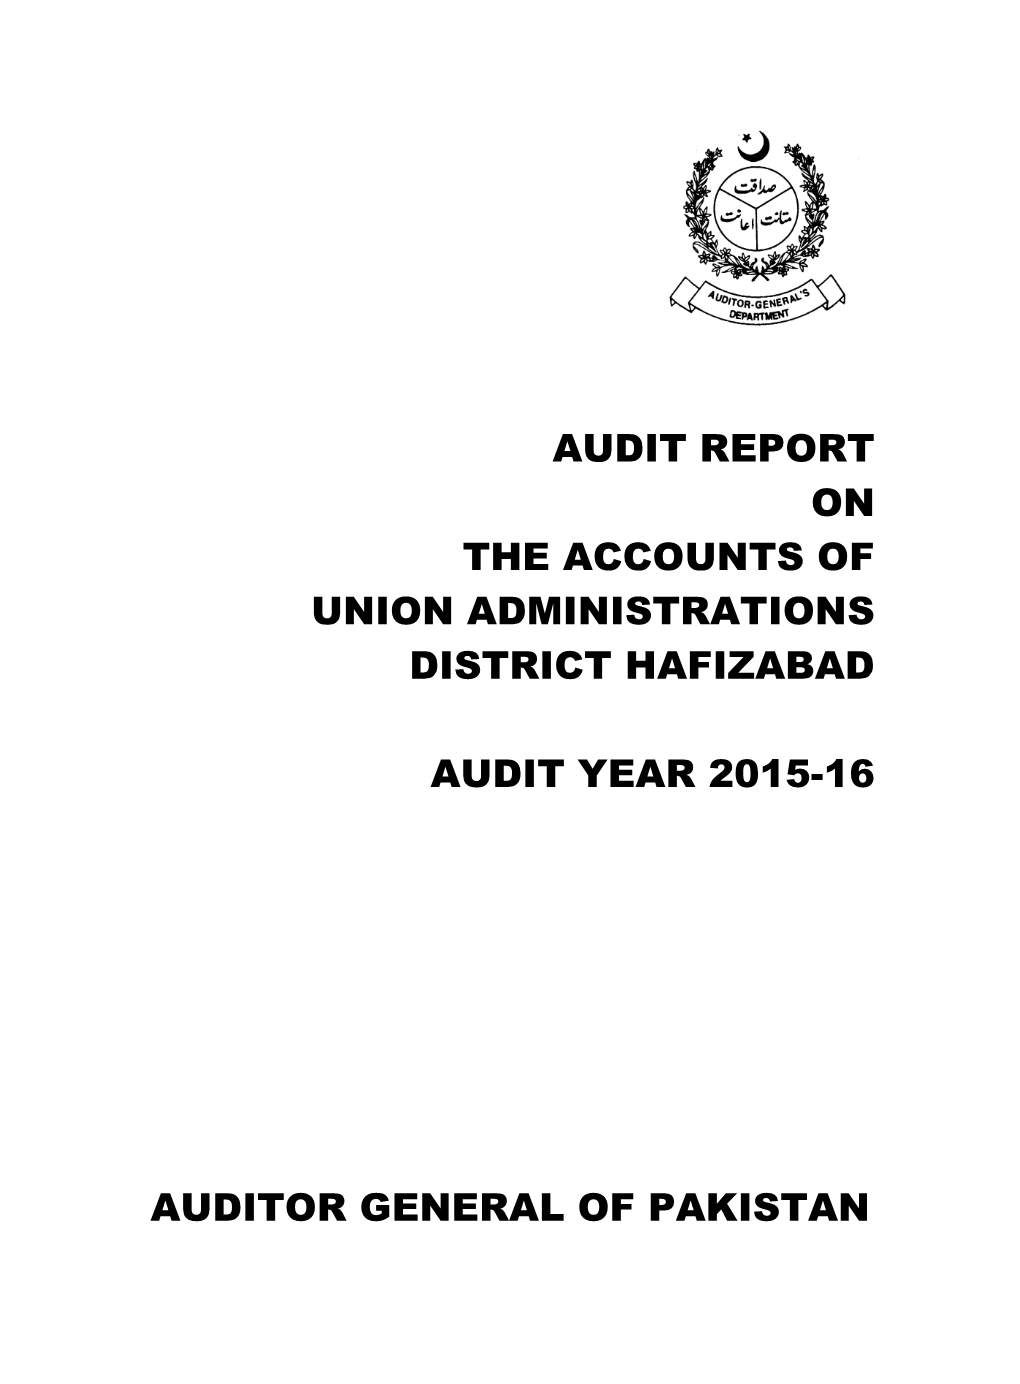 Audit Report on the Accounts of Union Administrations District Hafizabad